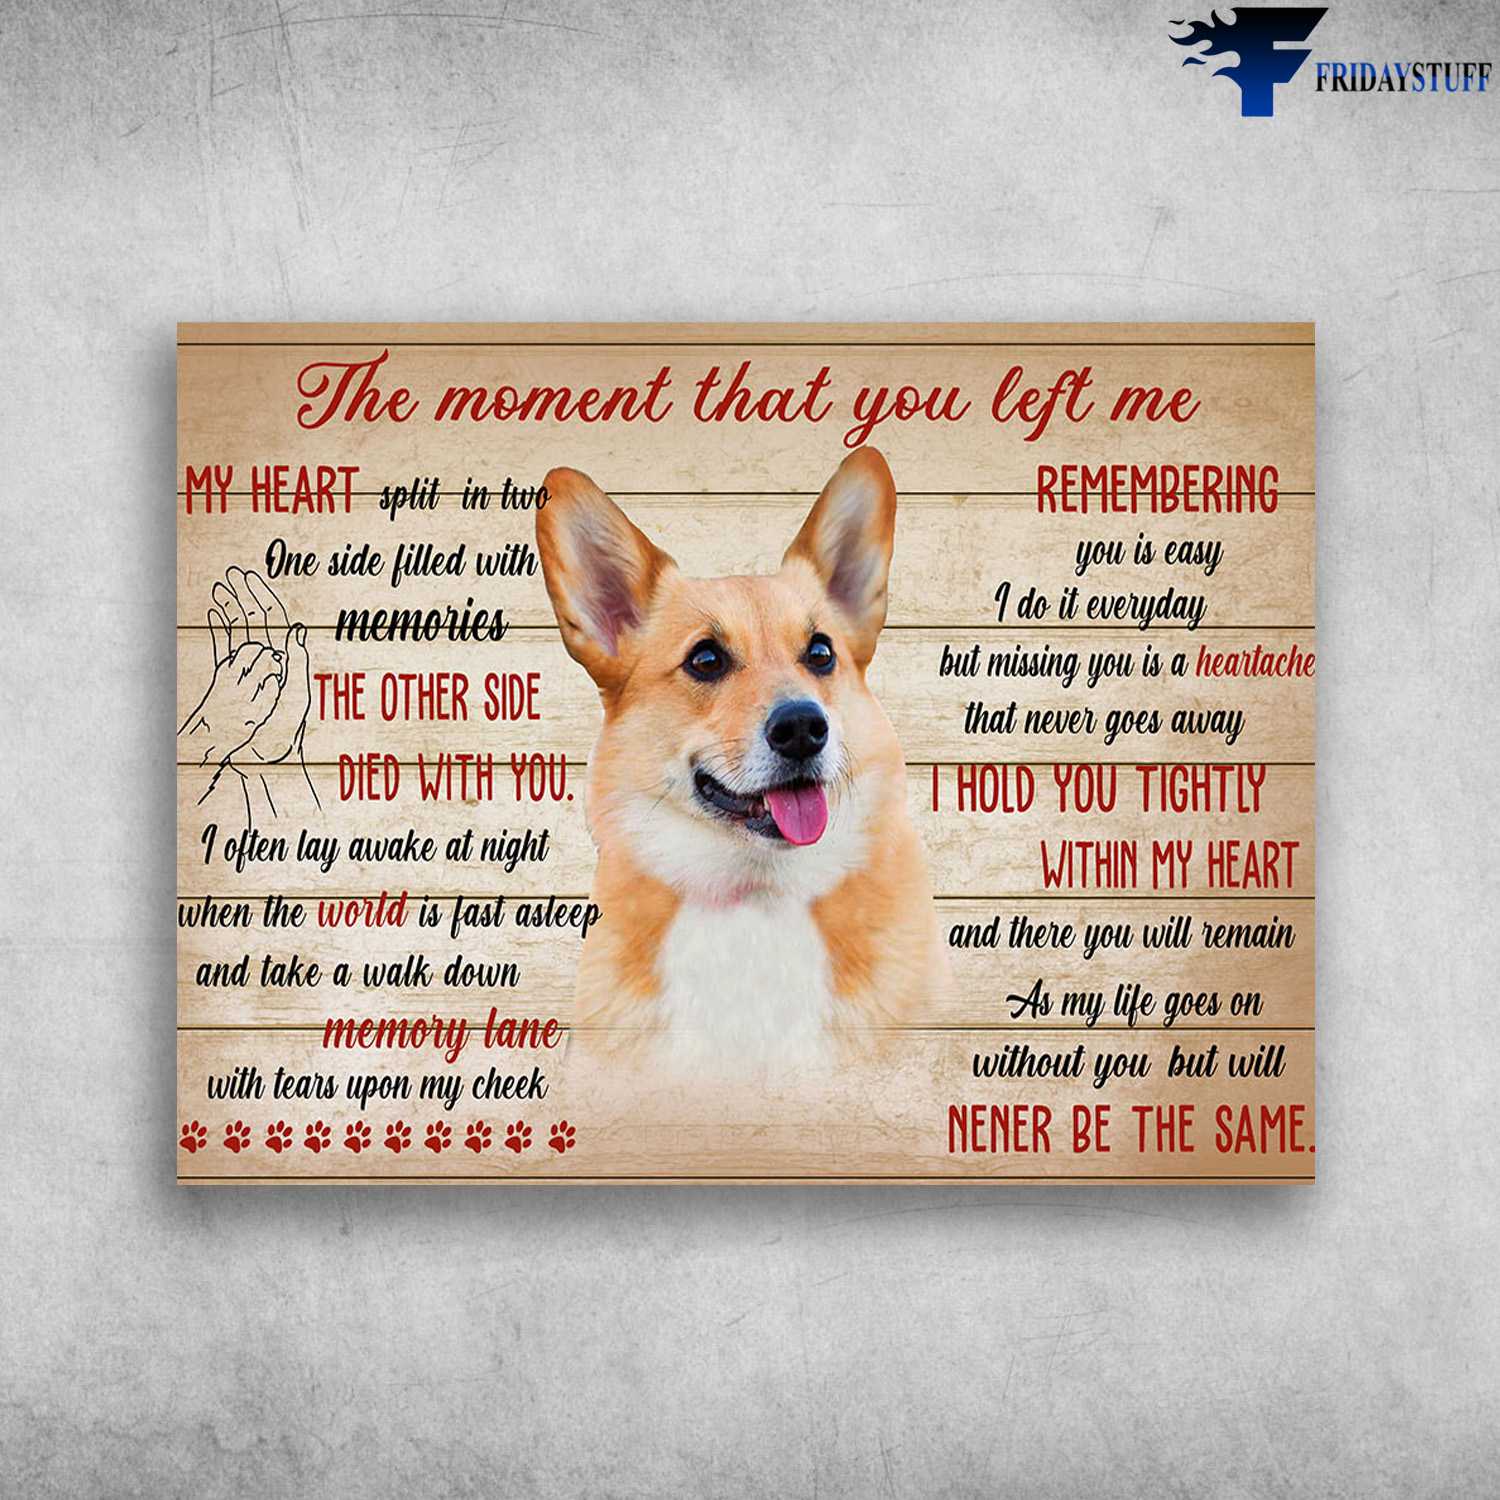 Corgi Dog, Dog Lover - The Moment That You Left Me, My Heart Split In Two, One Side Filled With Memoties, The Other Side, Died With You, I Often Lay Awake At Night, When World Is Fast Asleep